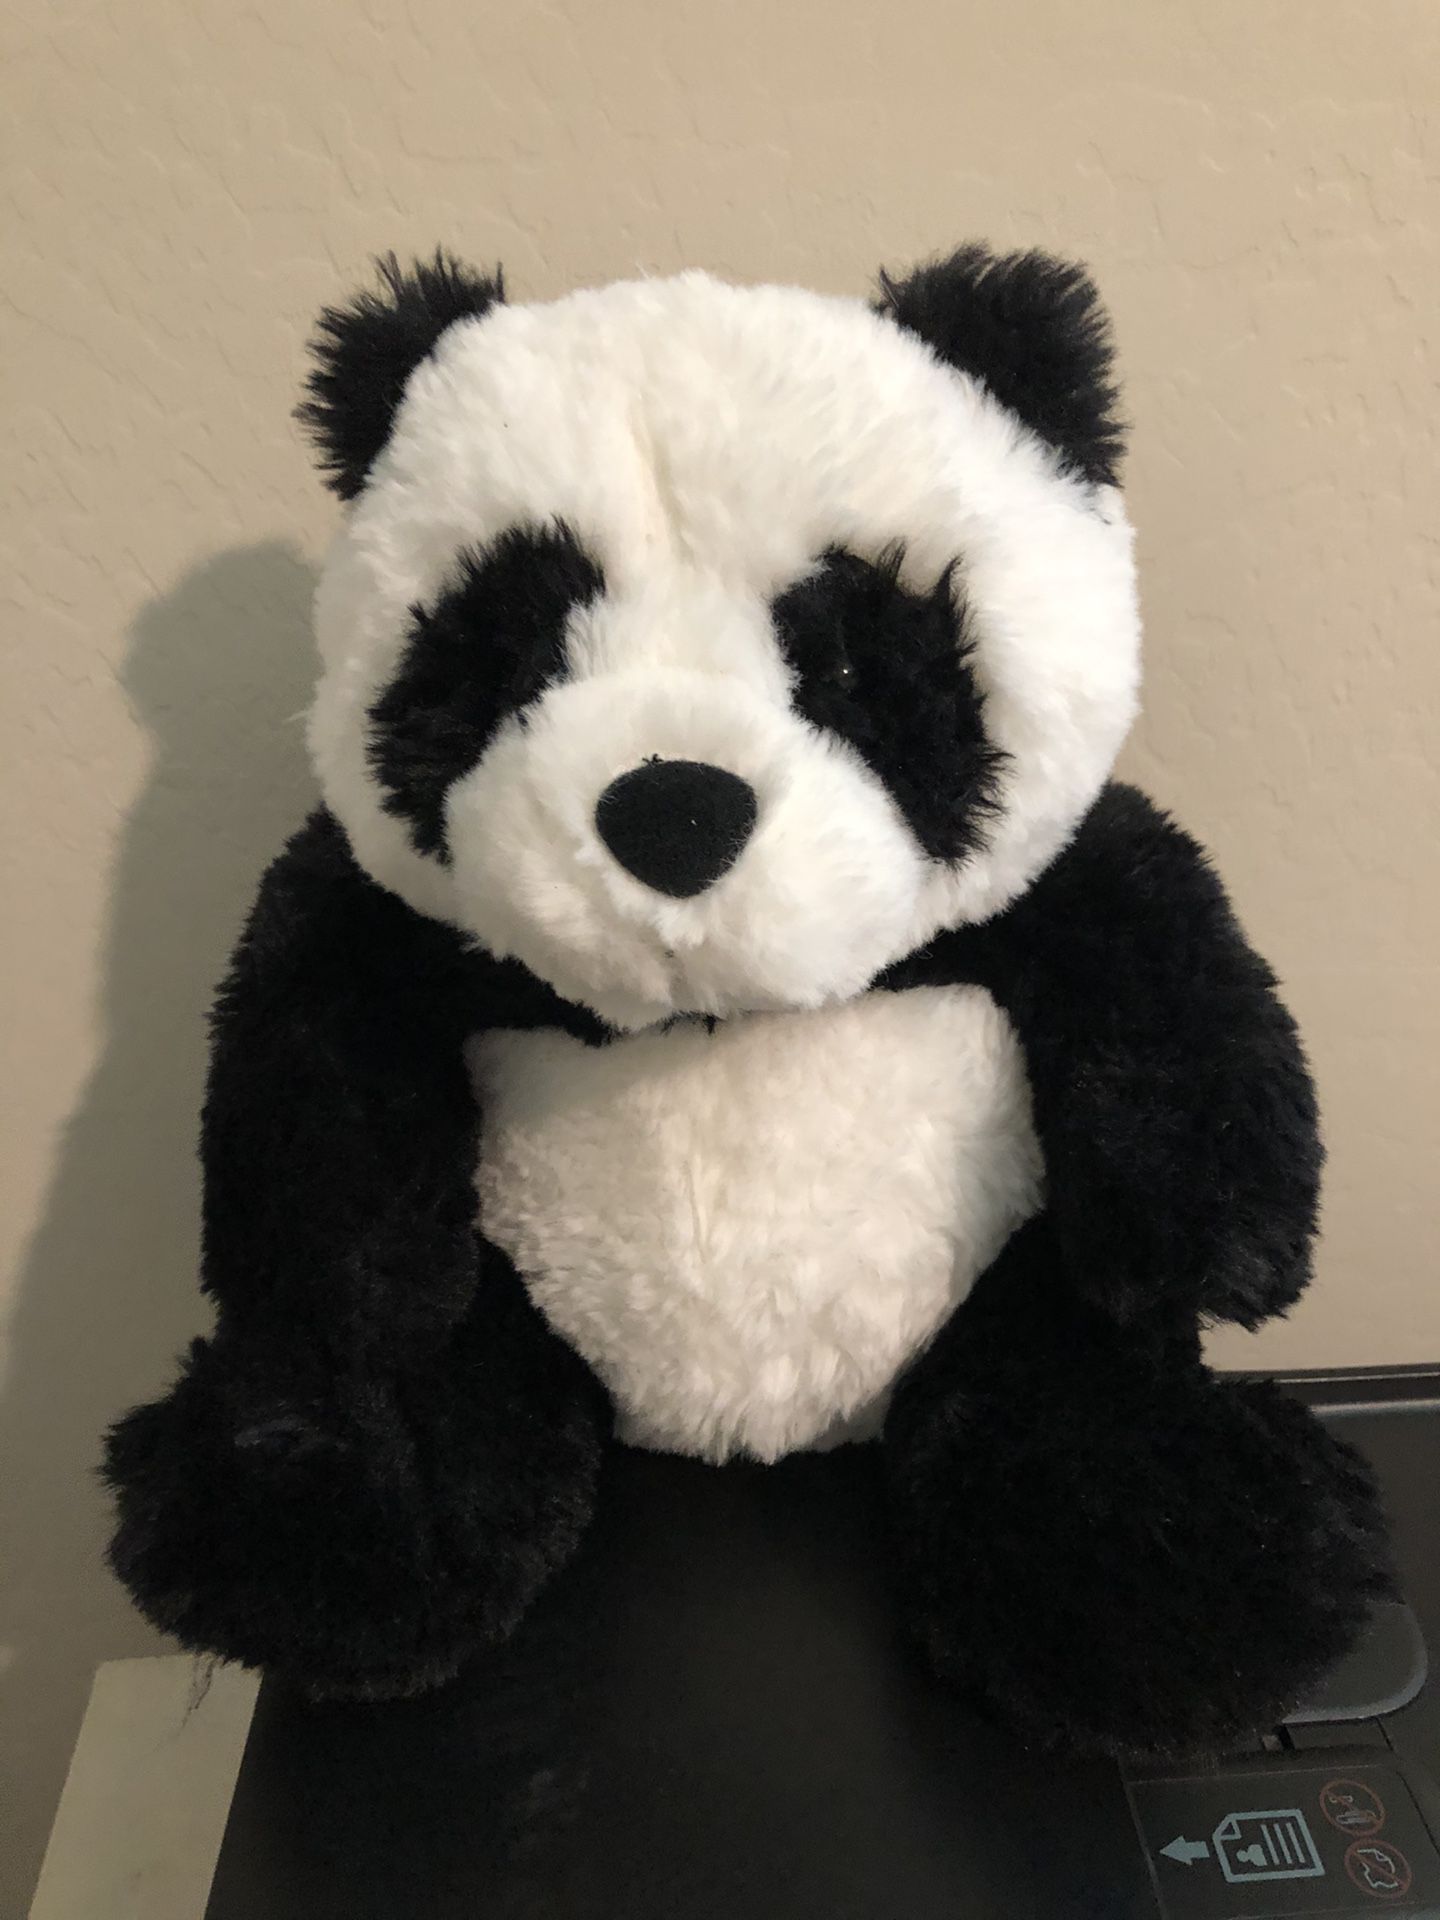 Panda Bear stuffed animal practically Brand New 12 inches tall and 9 inches wide